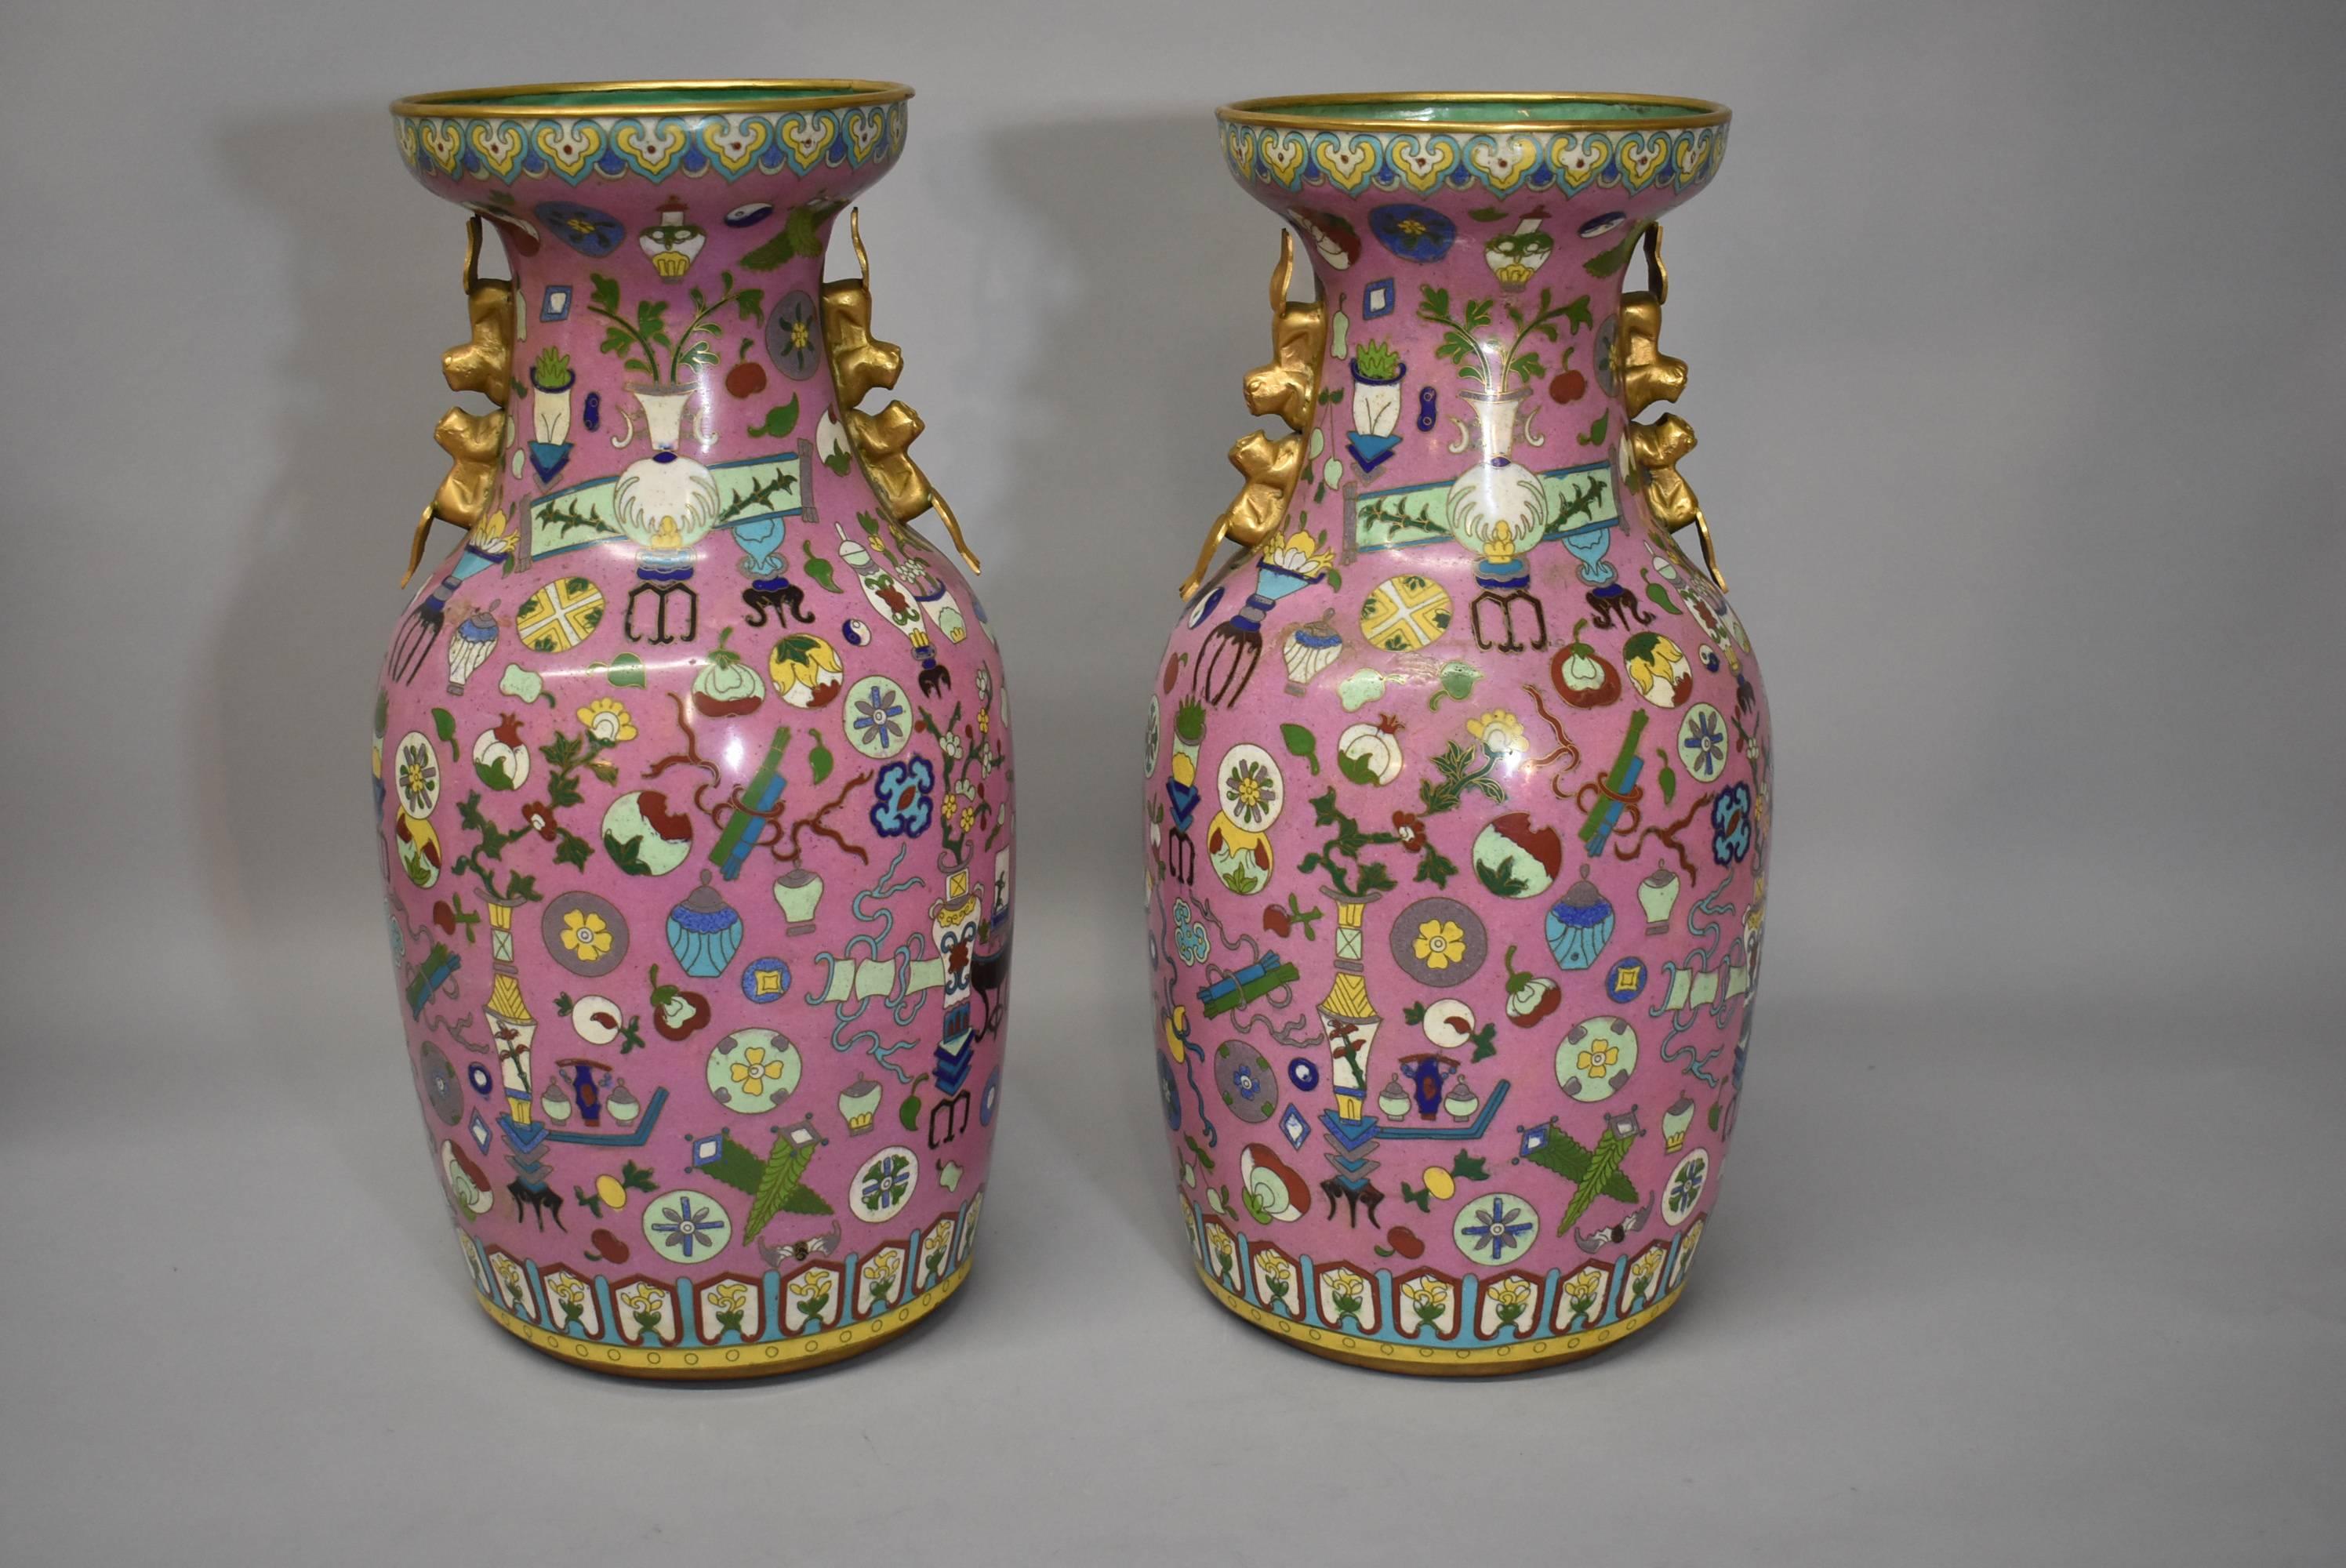 A beautiful pair of cloisonné vases in the Hundred Treasures pattern. This stunning vases feature a rose tone with applied brass handles with a double squirrel design and a decorated bottom. Very good condition with two old repair as photoed. The